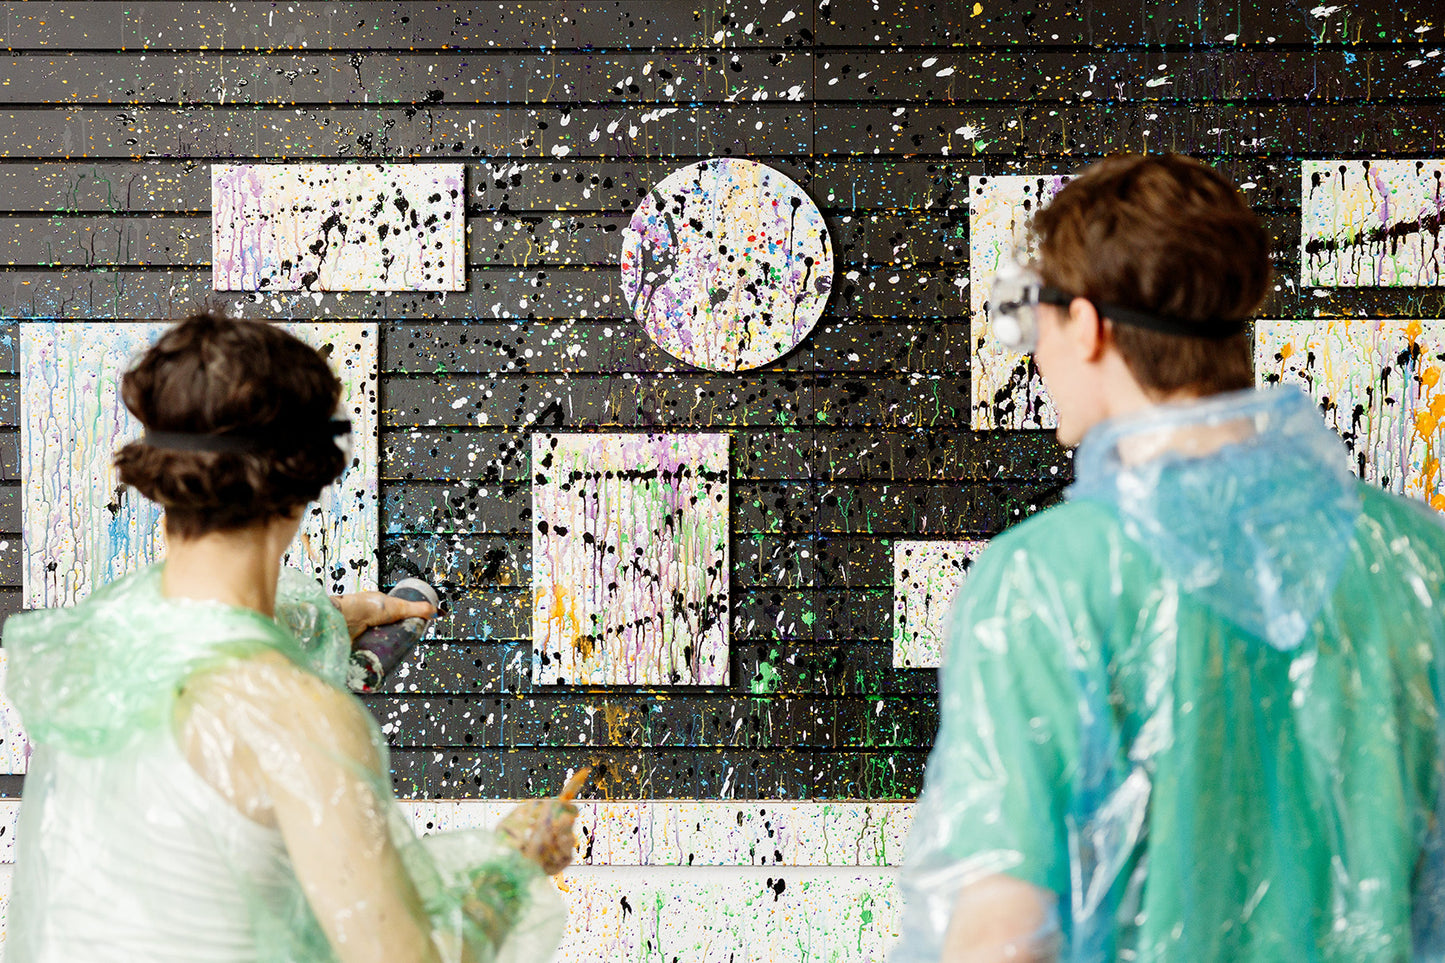 Splatter Painting & Paint Pouring Session